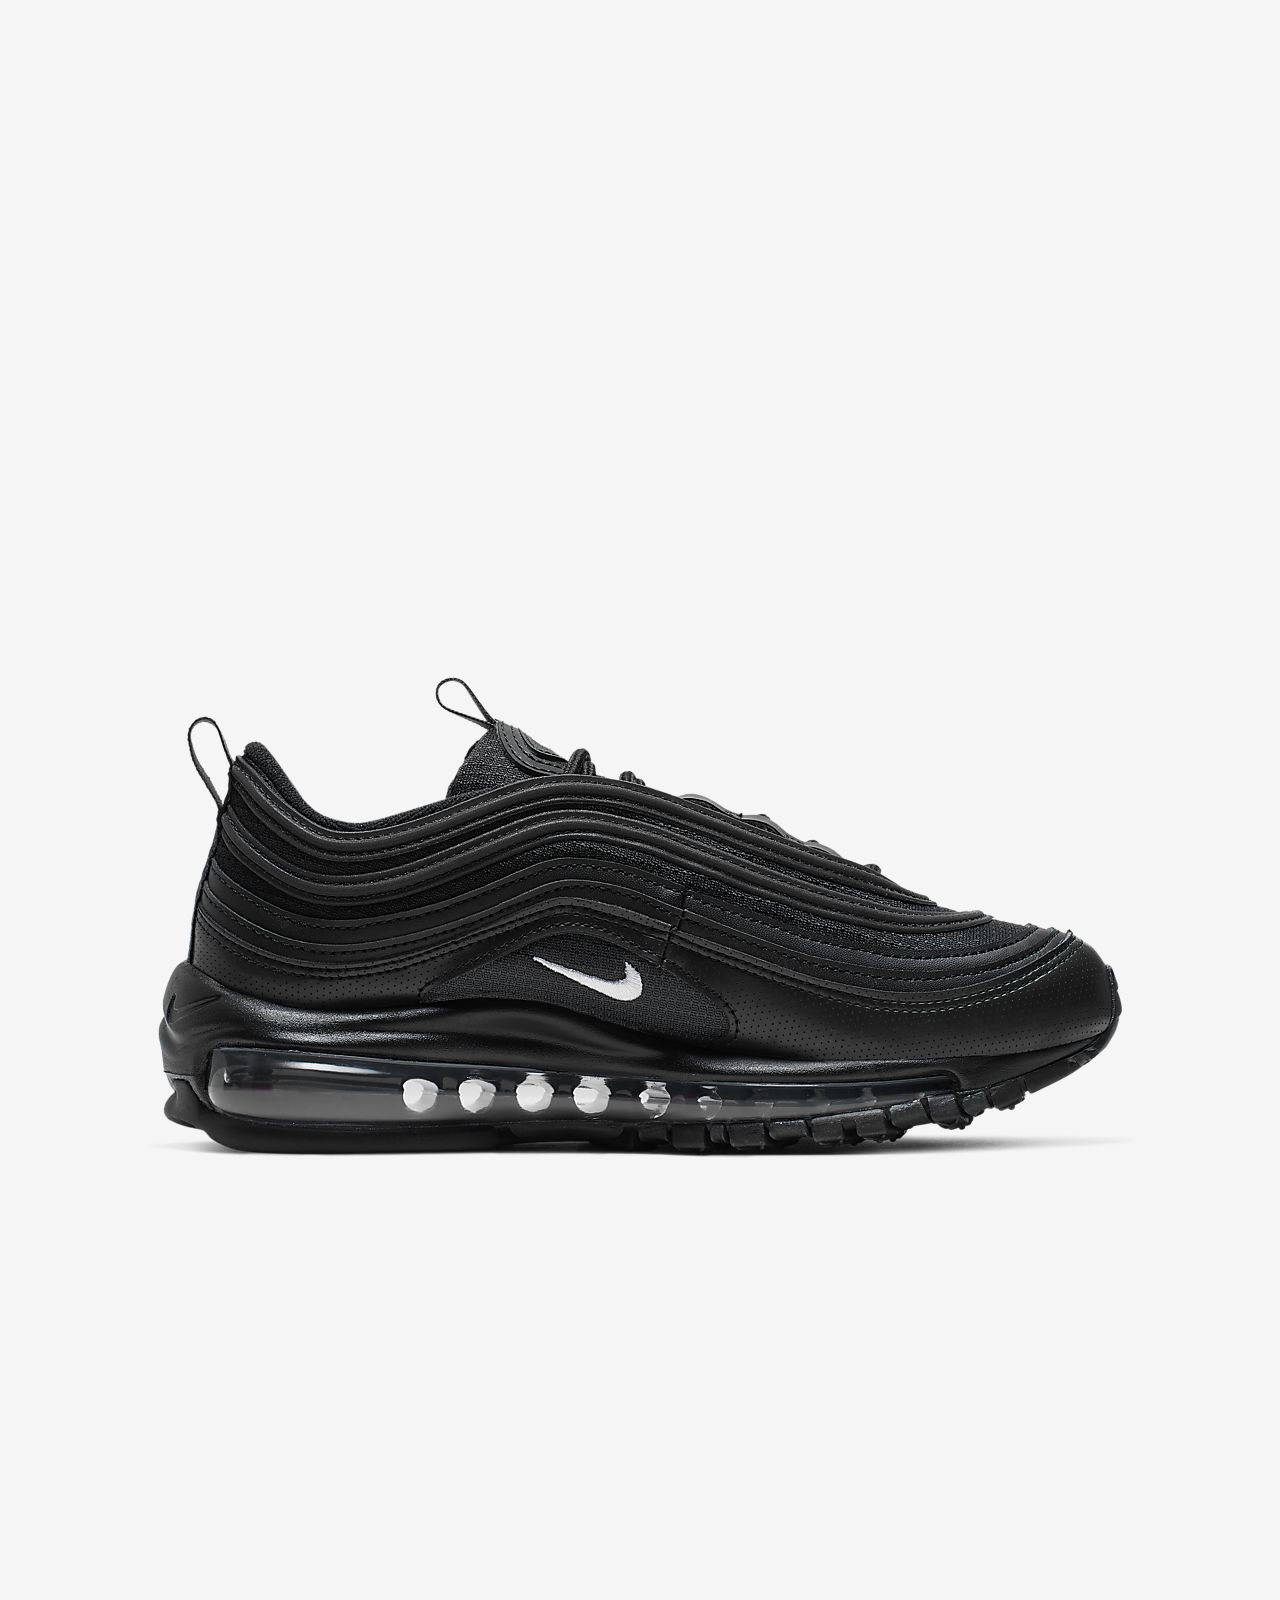 97s size 3